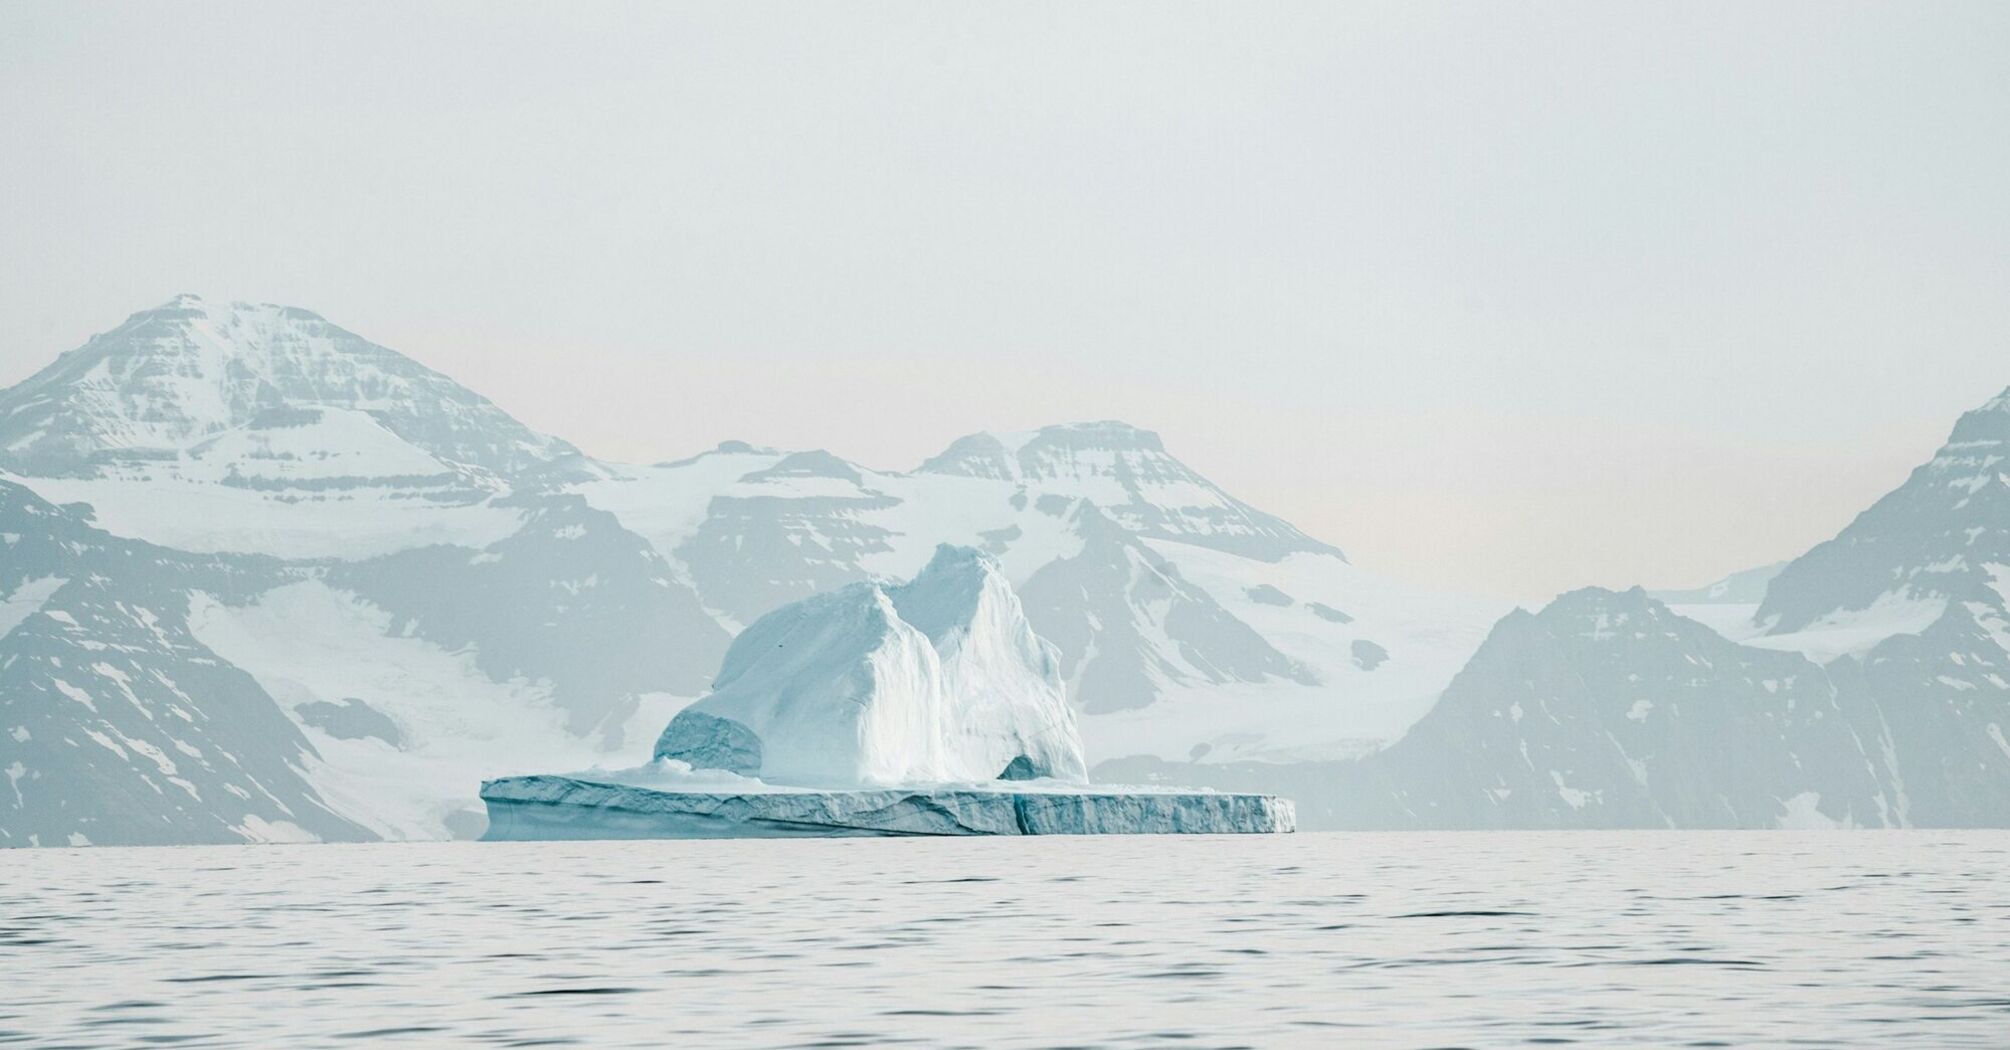 Serene Arctic landscape with an iceberg and snow-capped mountains